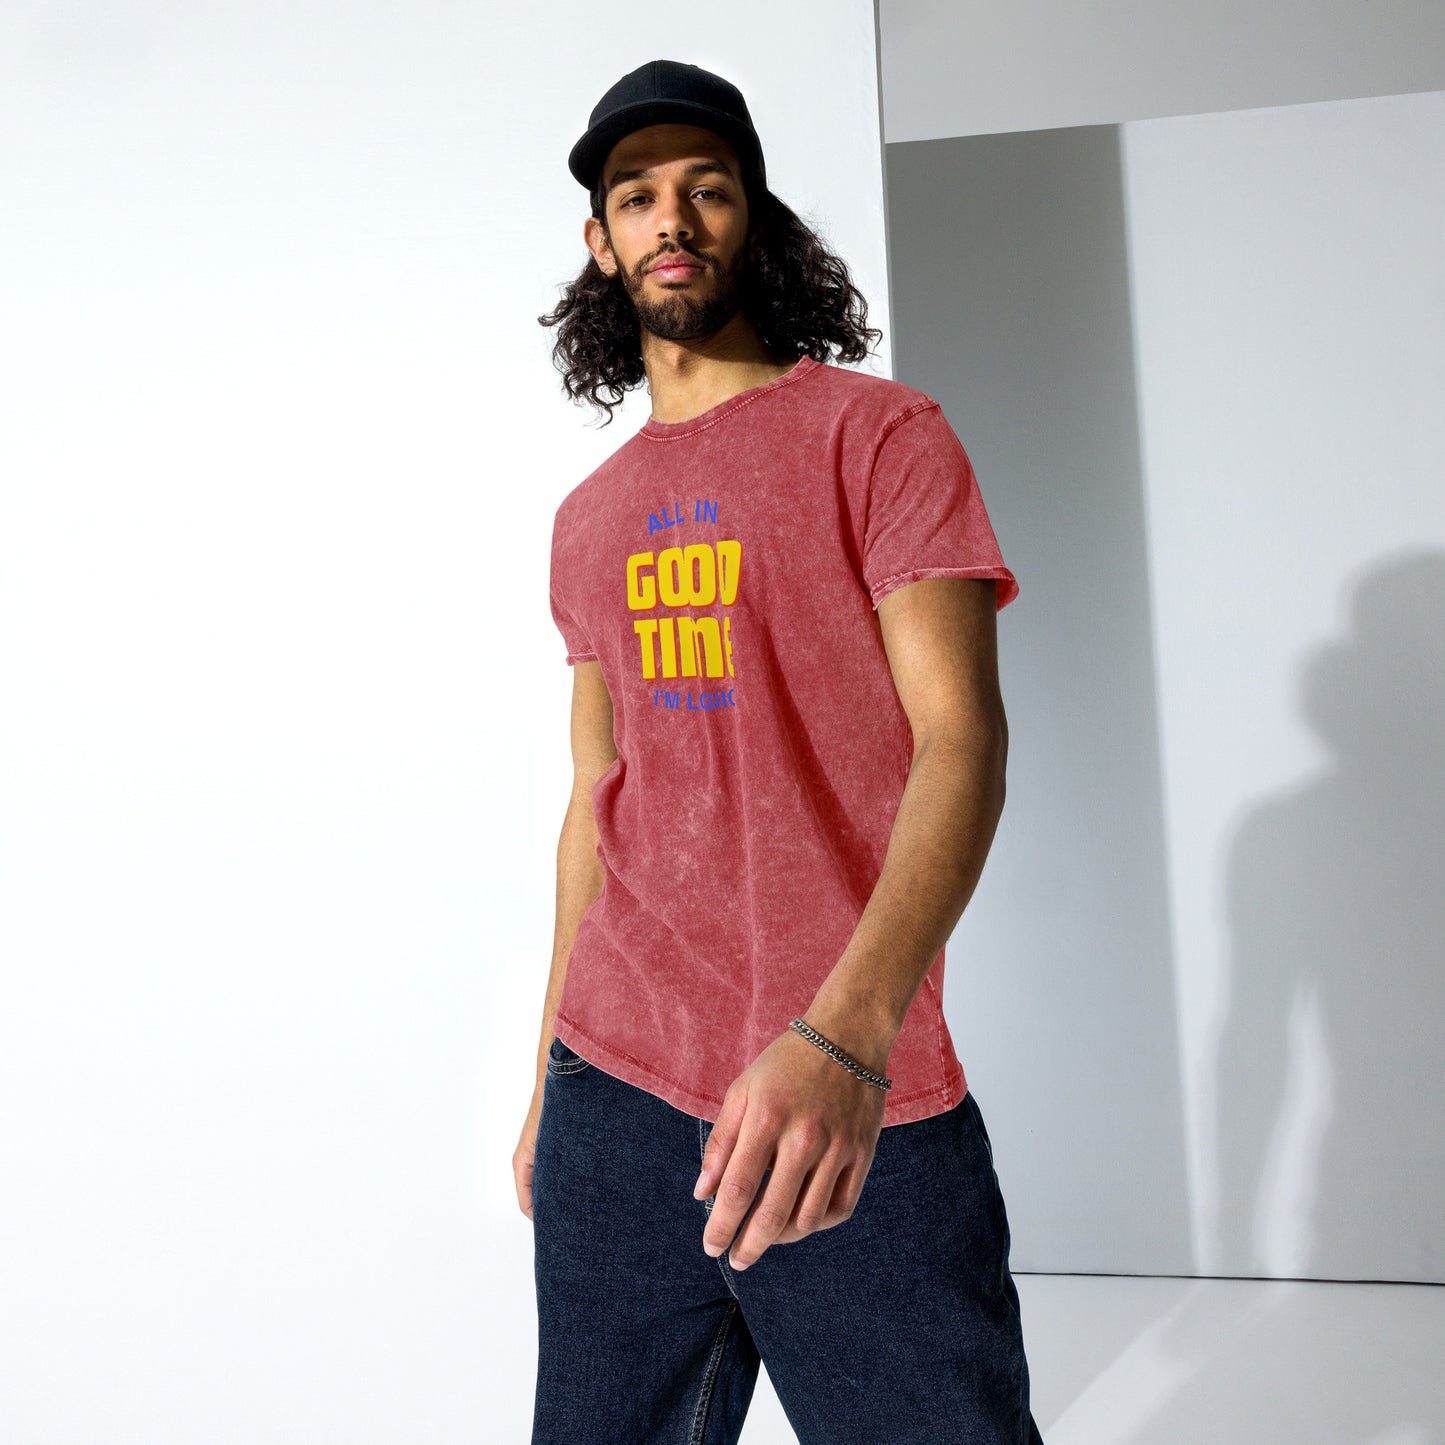 All in Good Time Denim T-Shirt